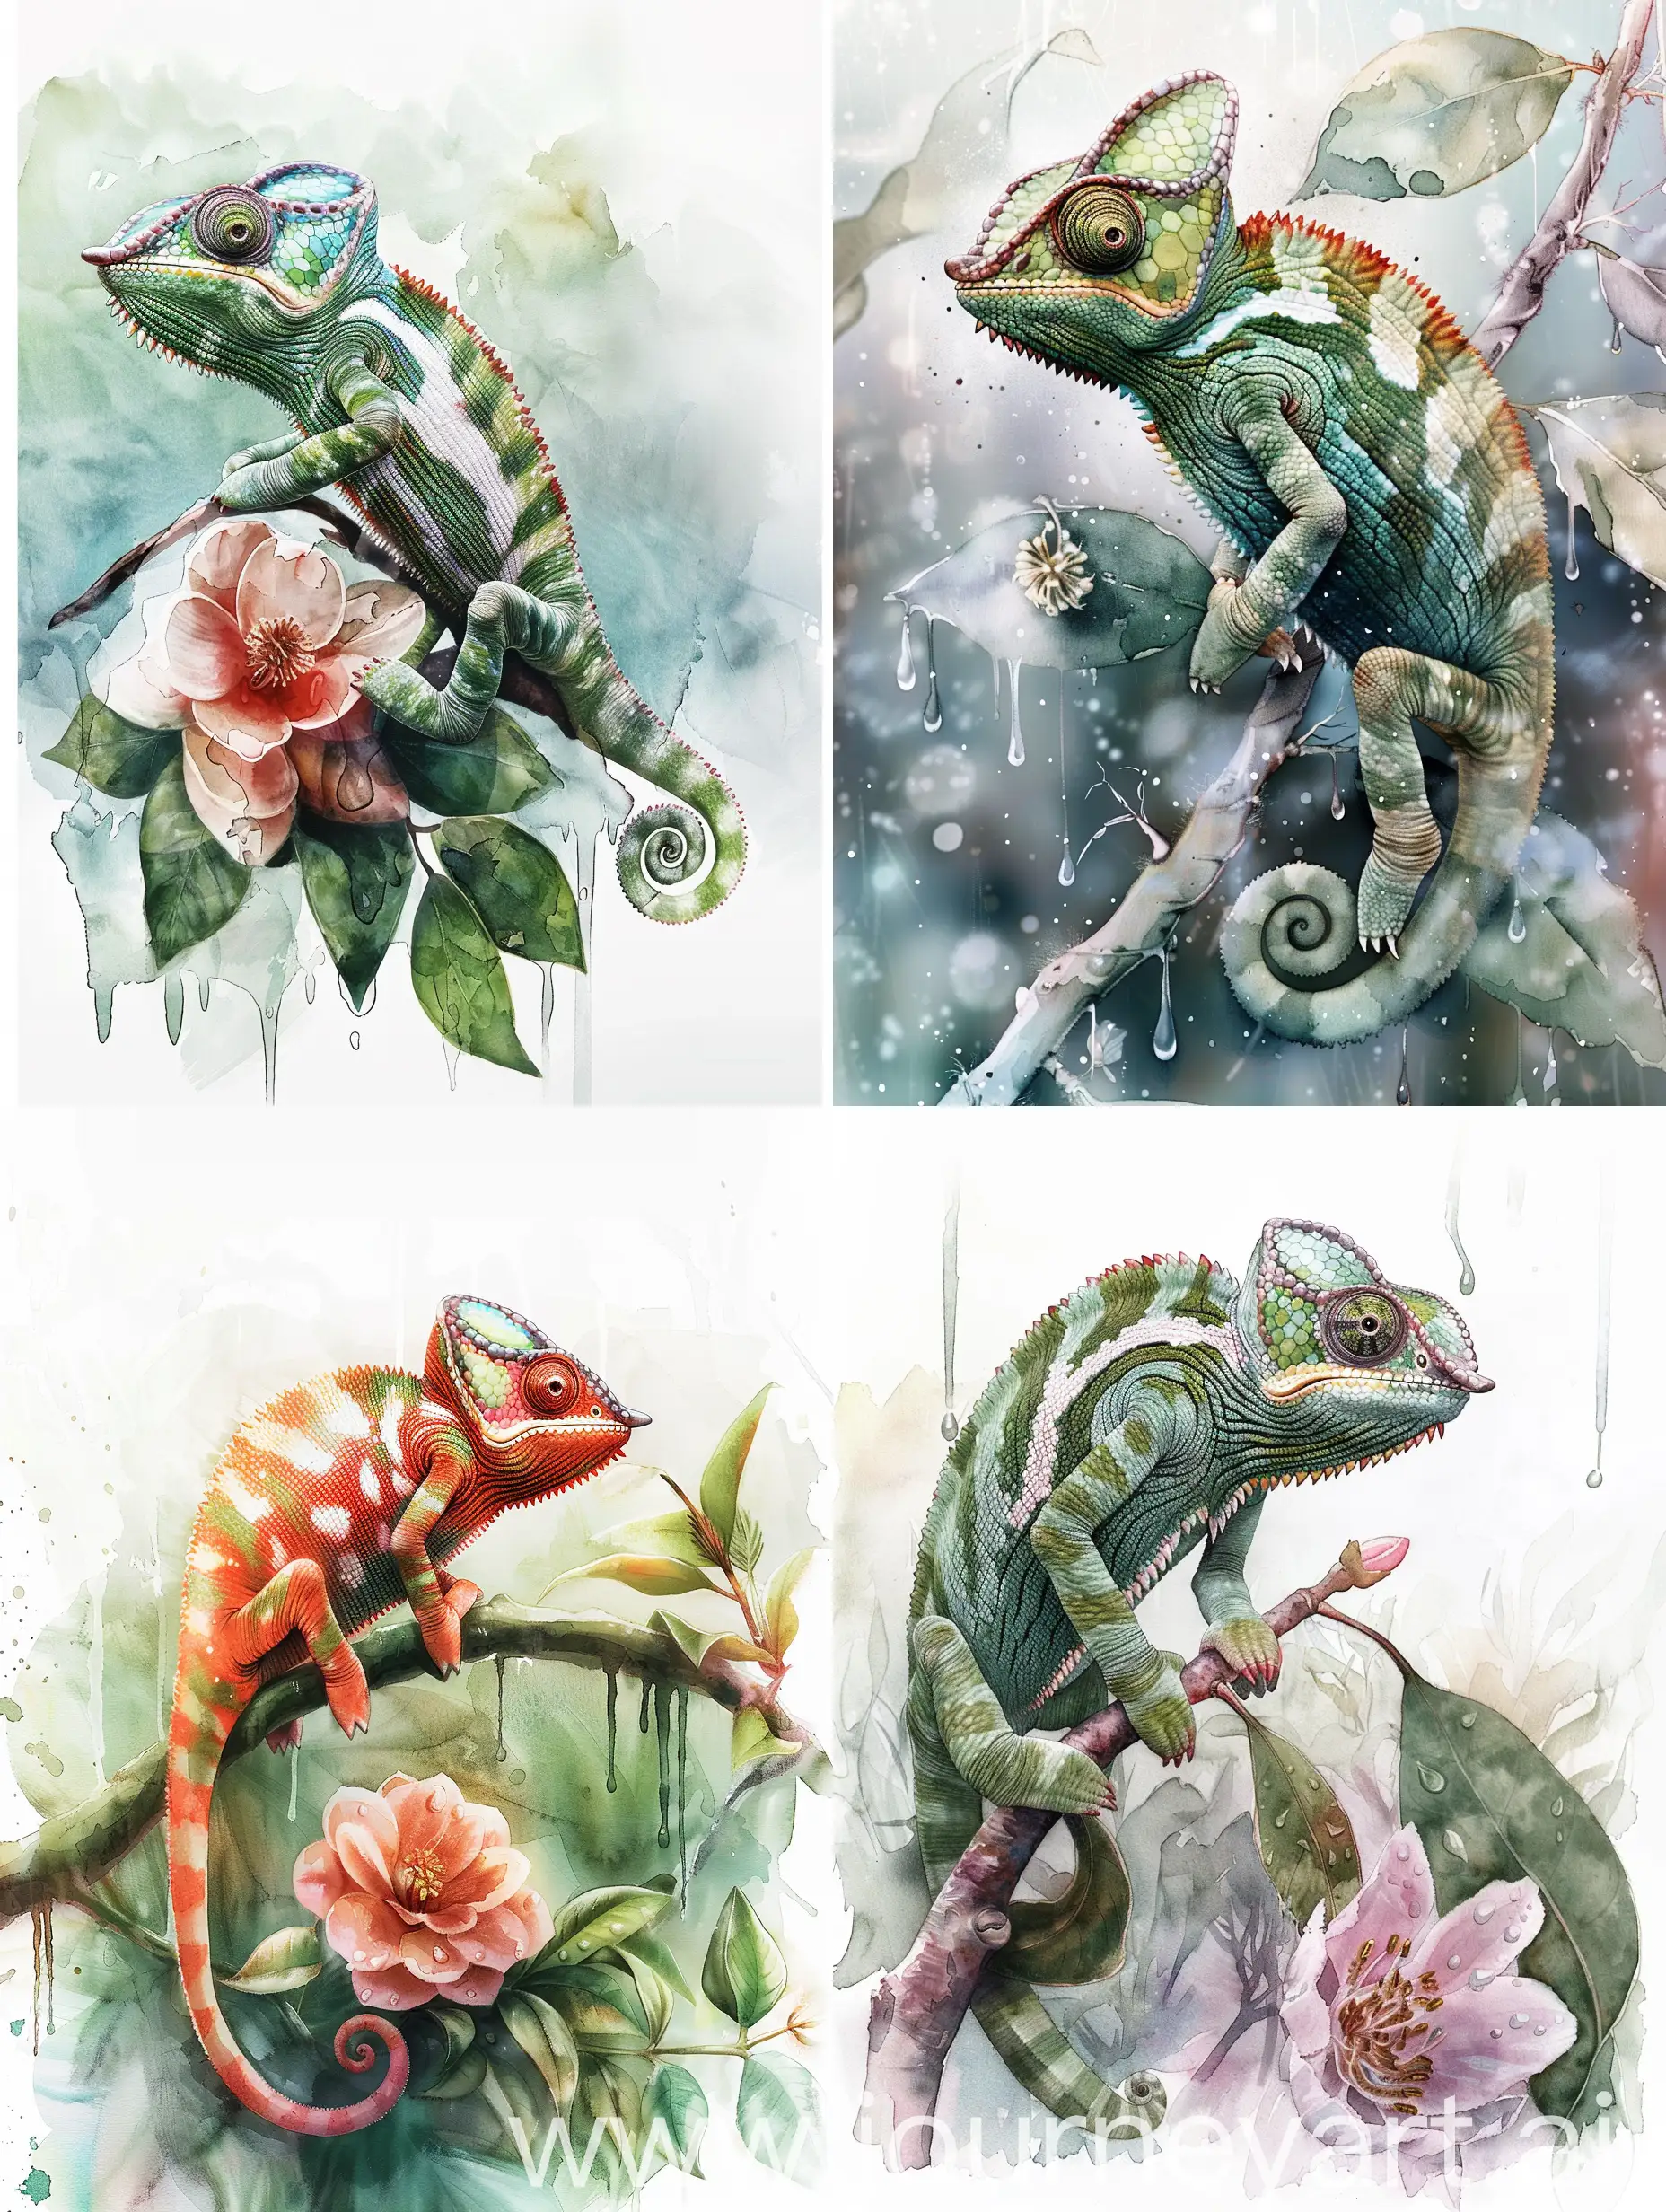 Chameleon-Watercolor-Painting-Sitting-on-Branch-with-Blurred-Floral-Background